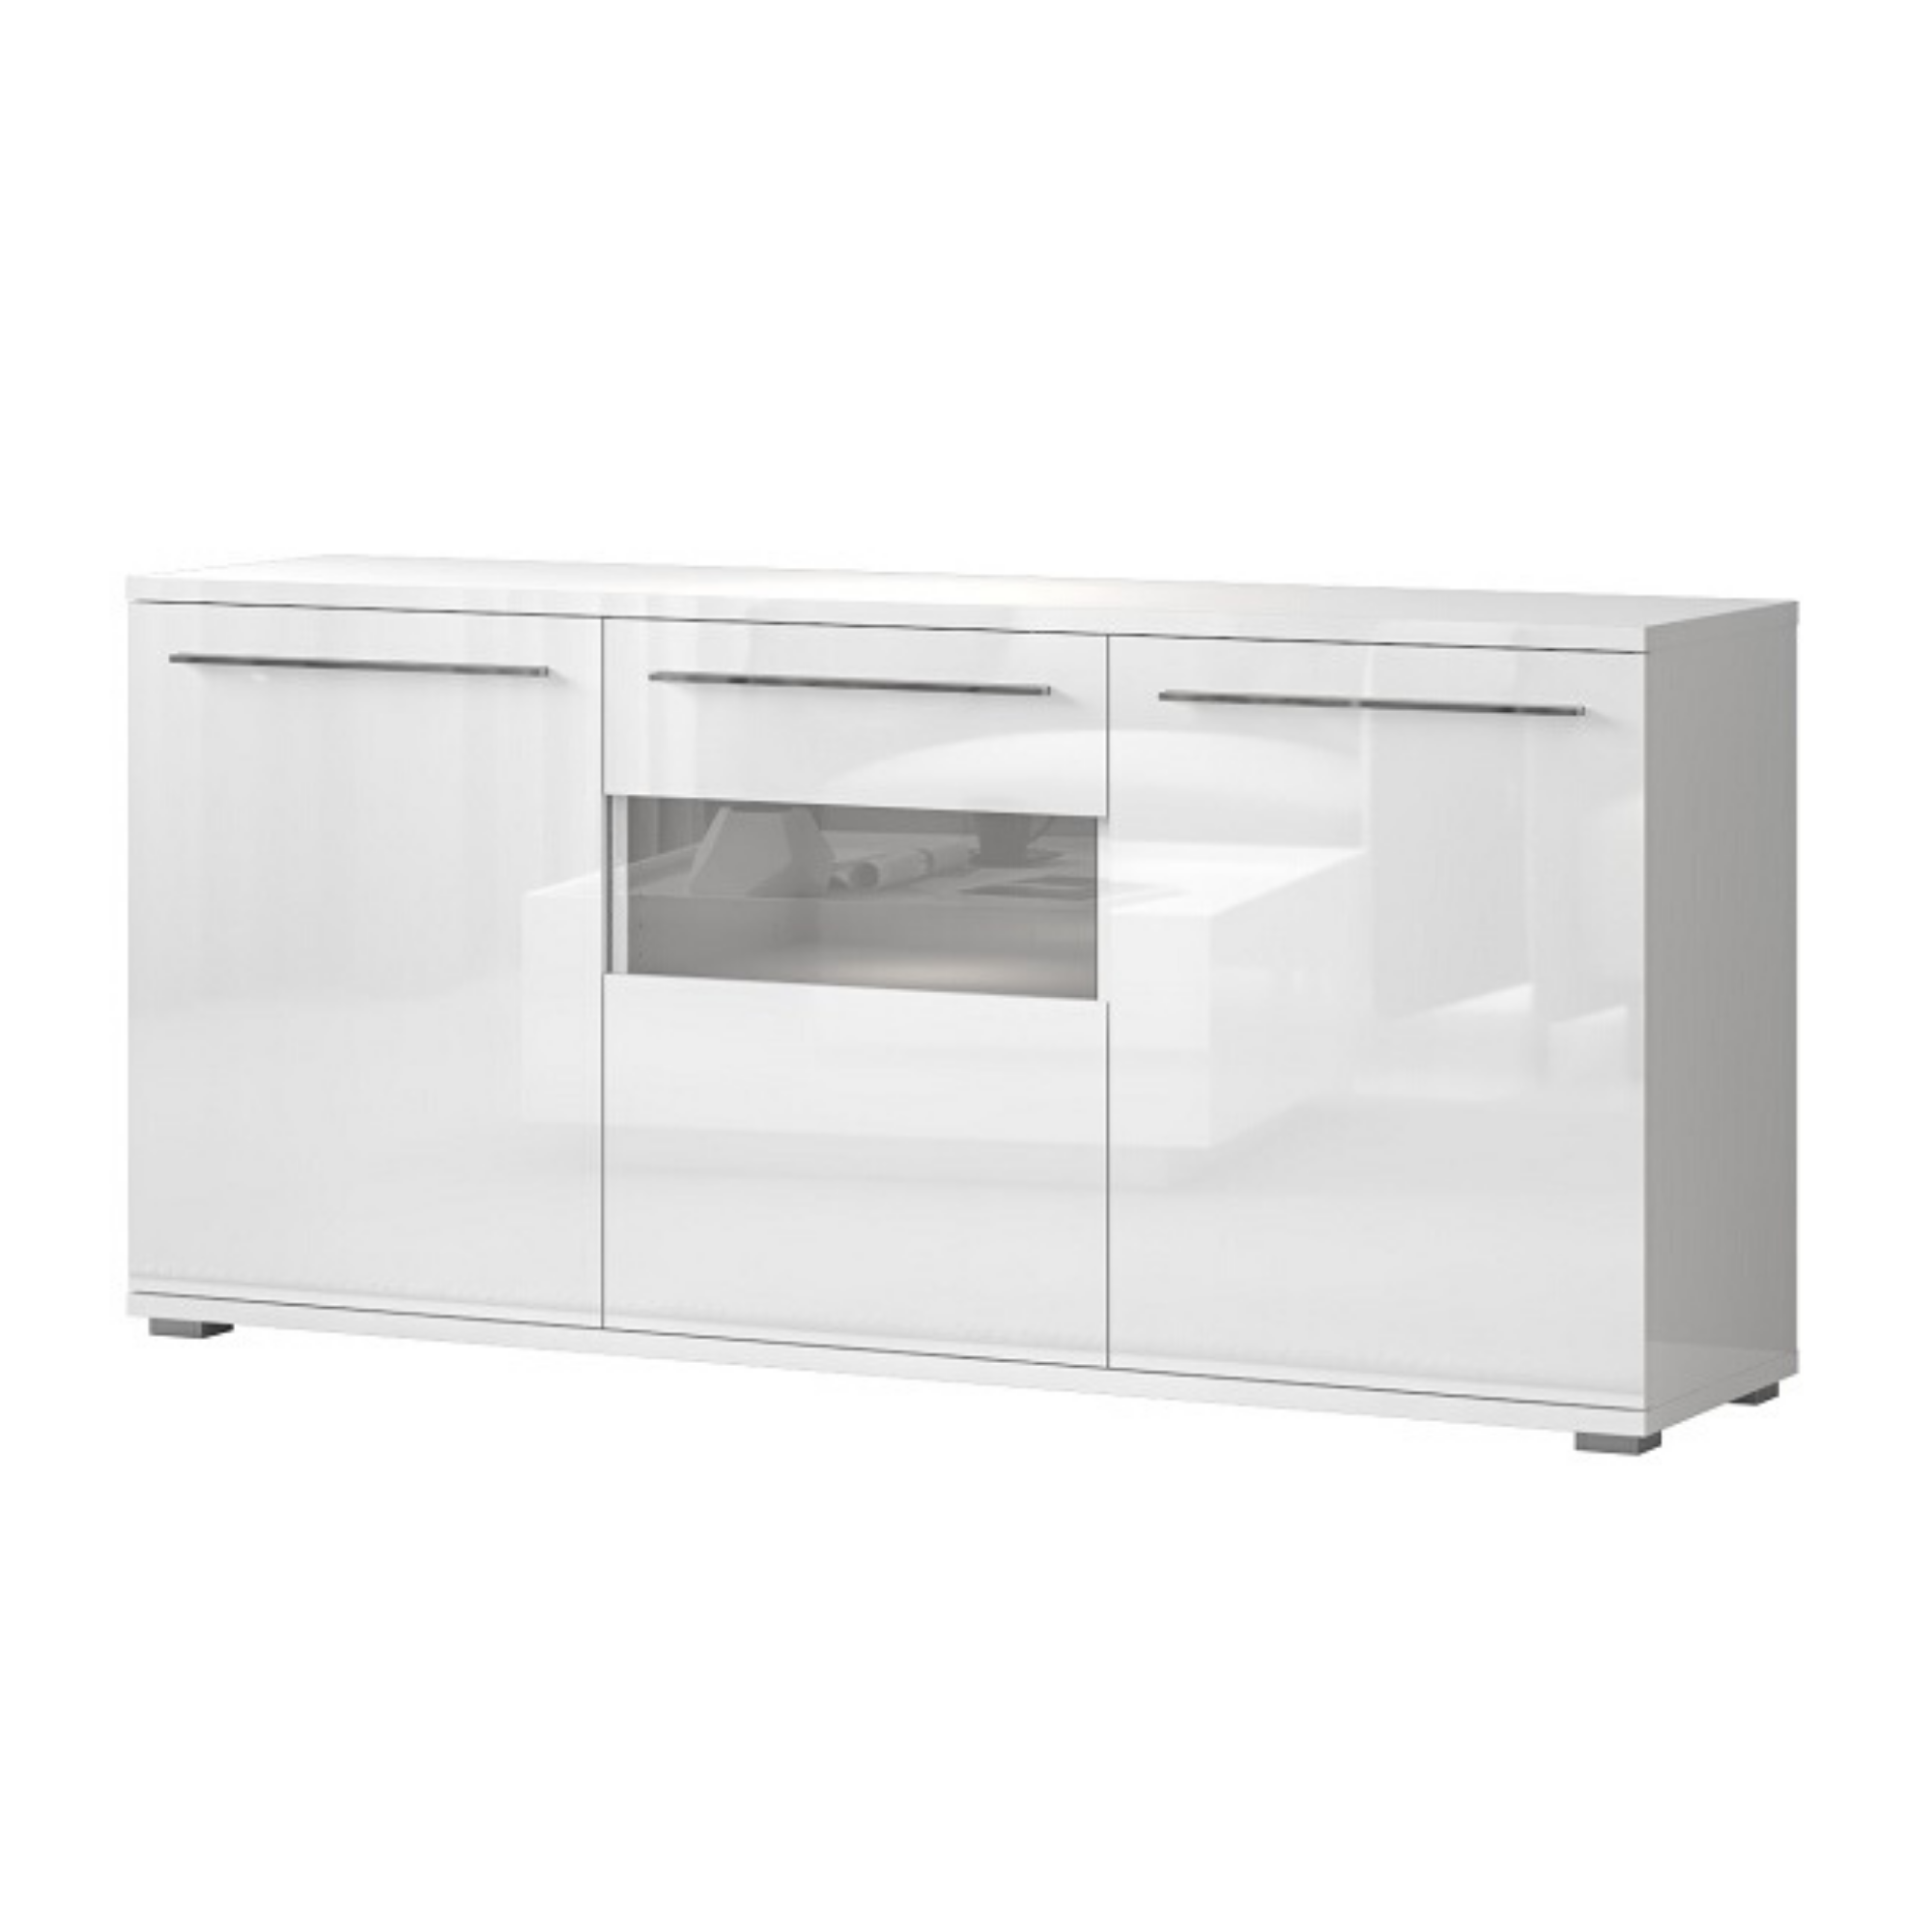 Piano 70 inch 3 Cabinet White High Gloss Sideboard - Furniture.Agency